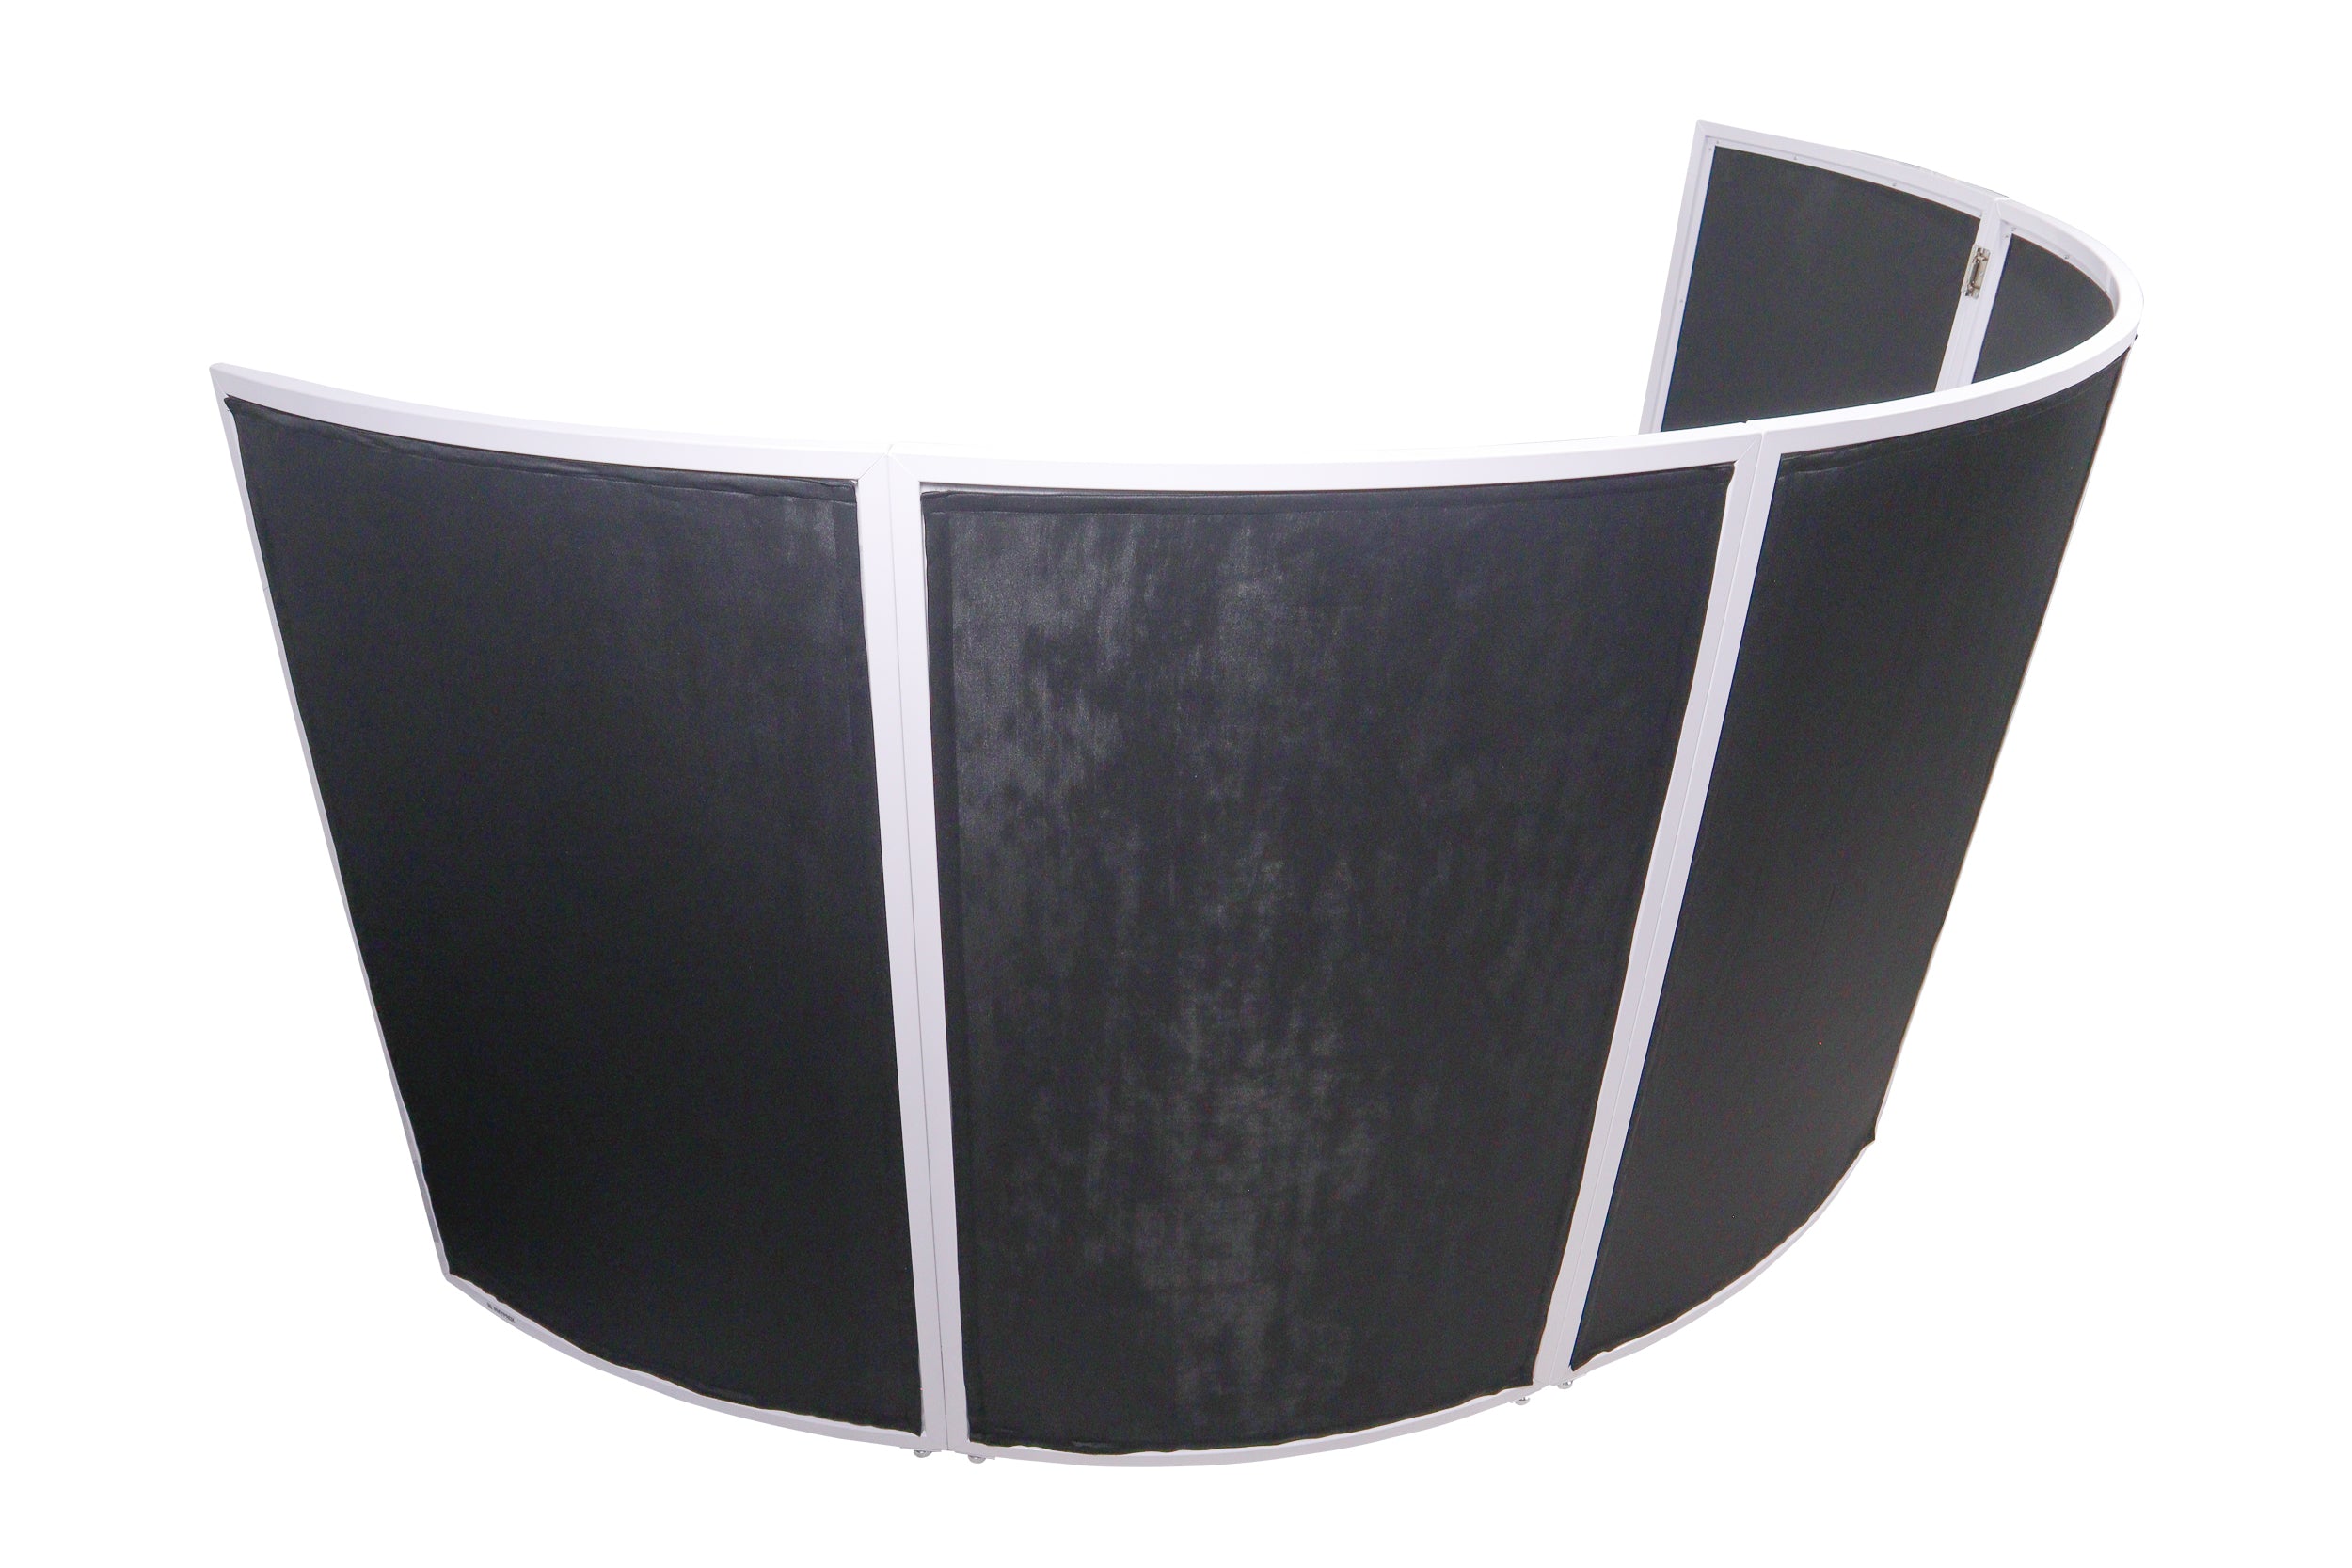 Pro X LUNA White Aluminum Curved 5 or 4 Panel DJ Facade Includes Carrying Bag Black White Scrims XF-LUNAWH